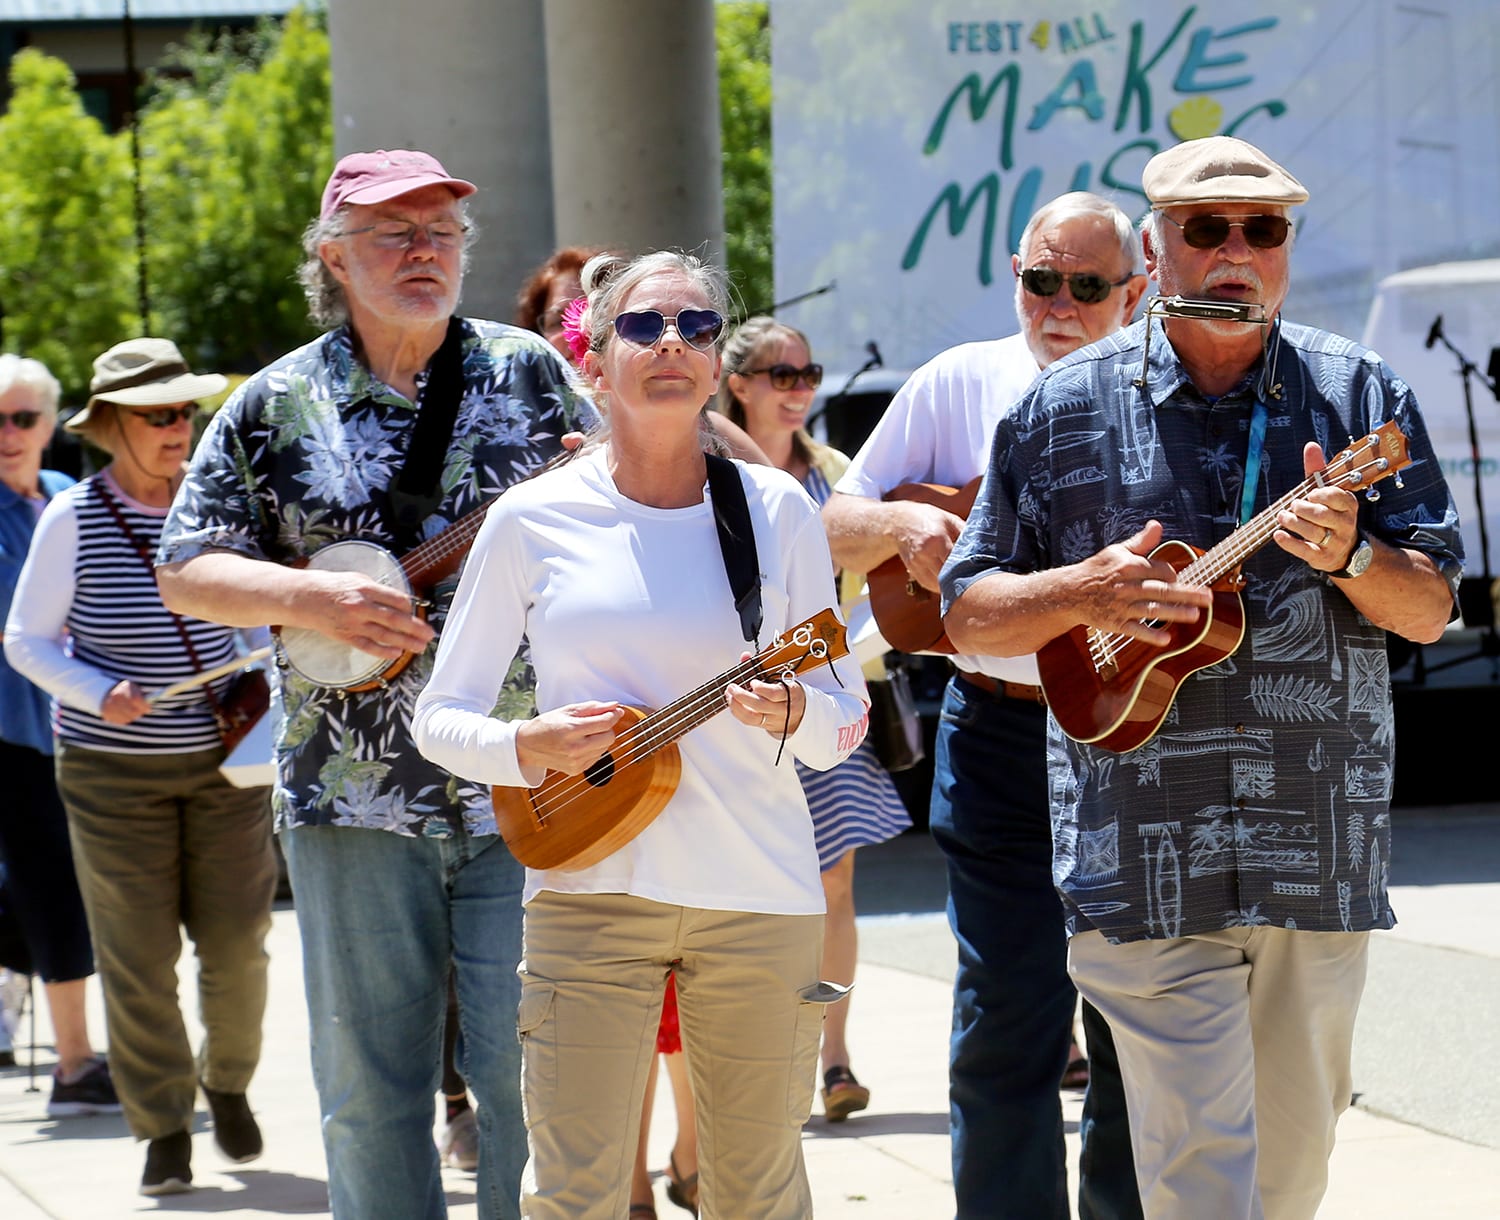 Musicians parade between stages during Make Music Day, June 21, at Uptown Gig Harbor.